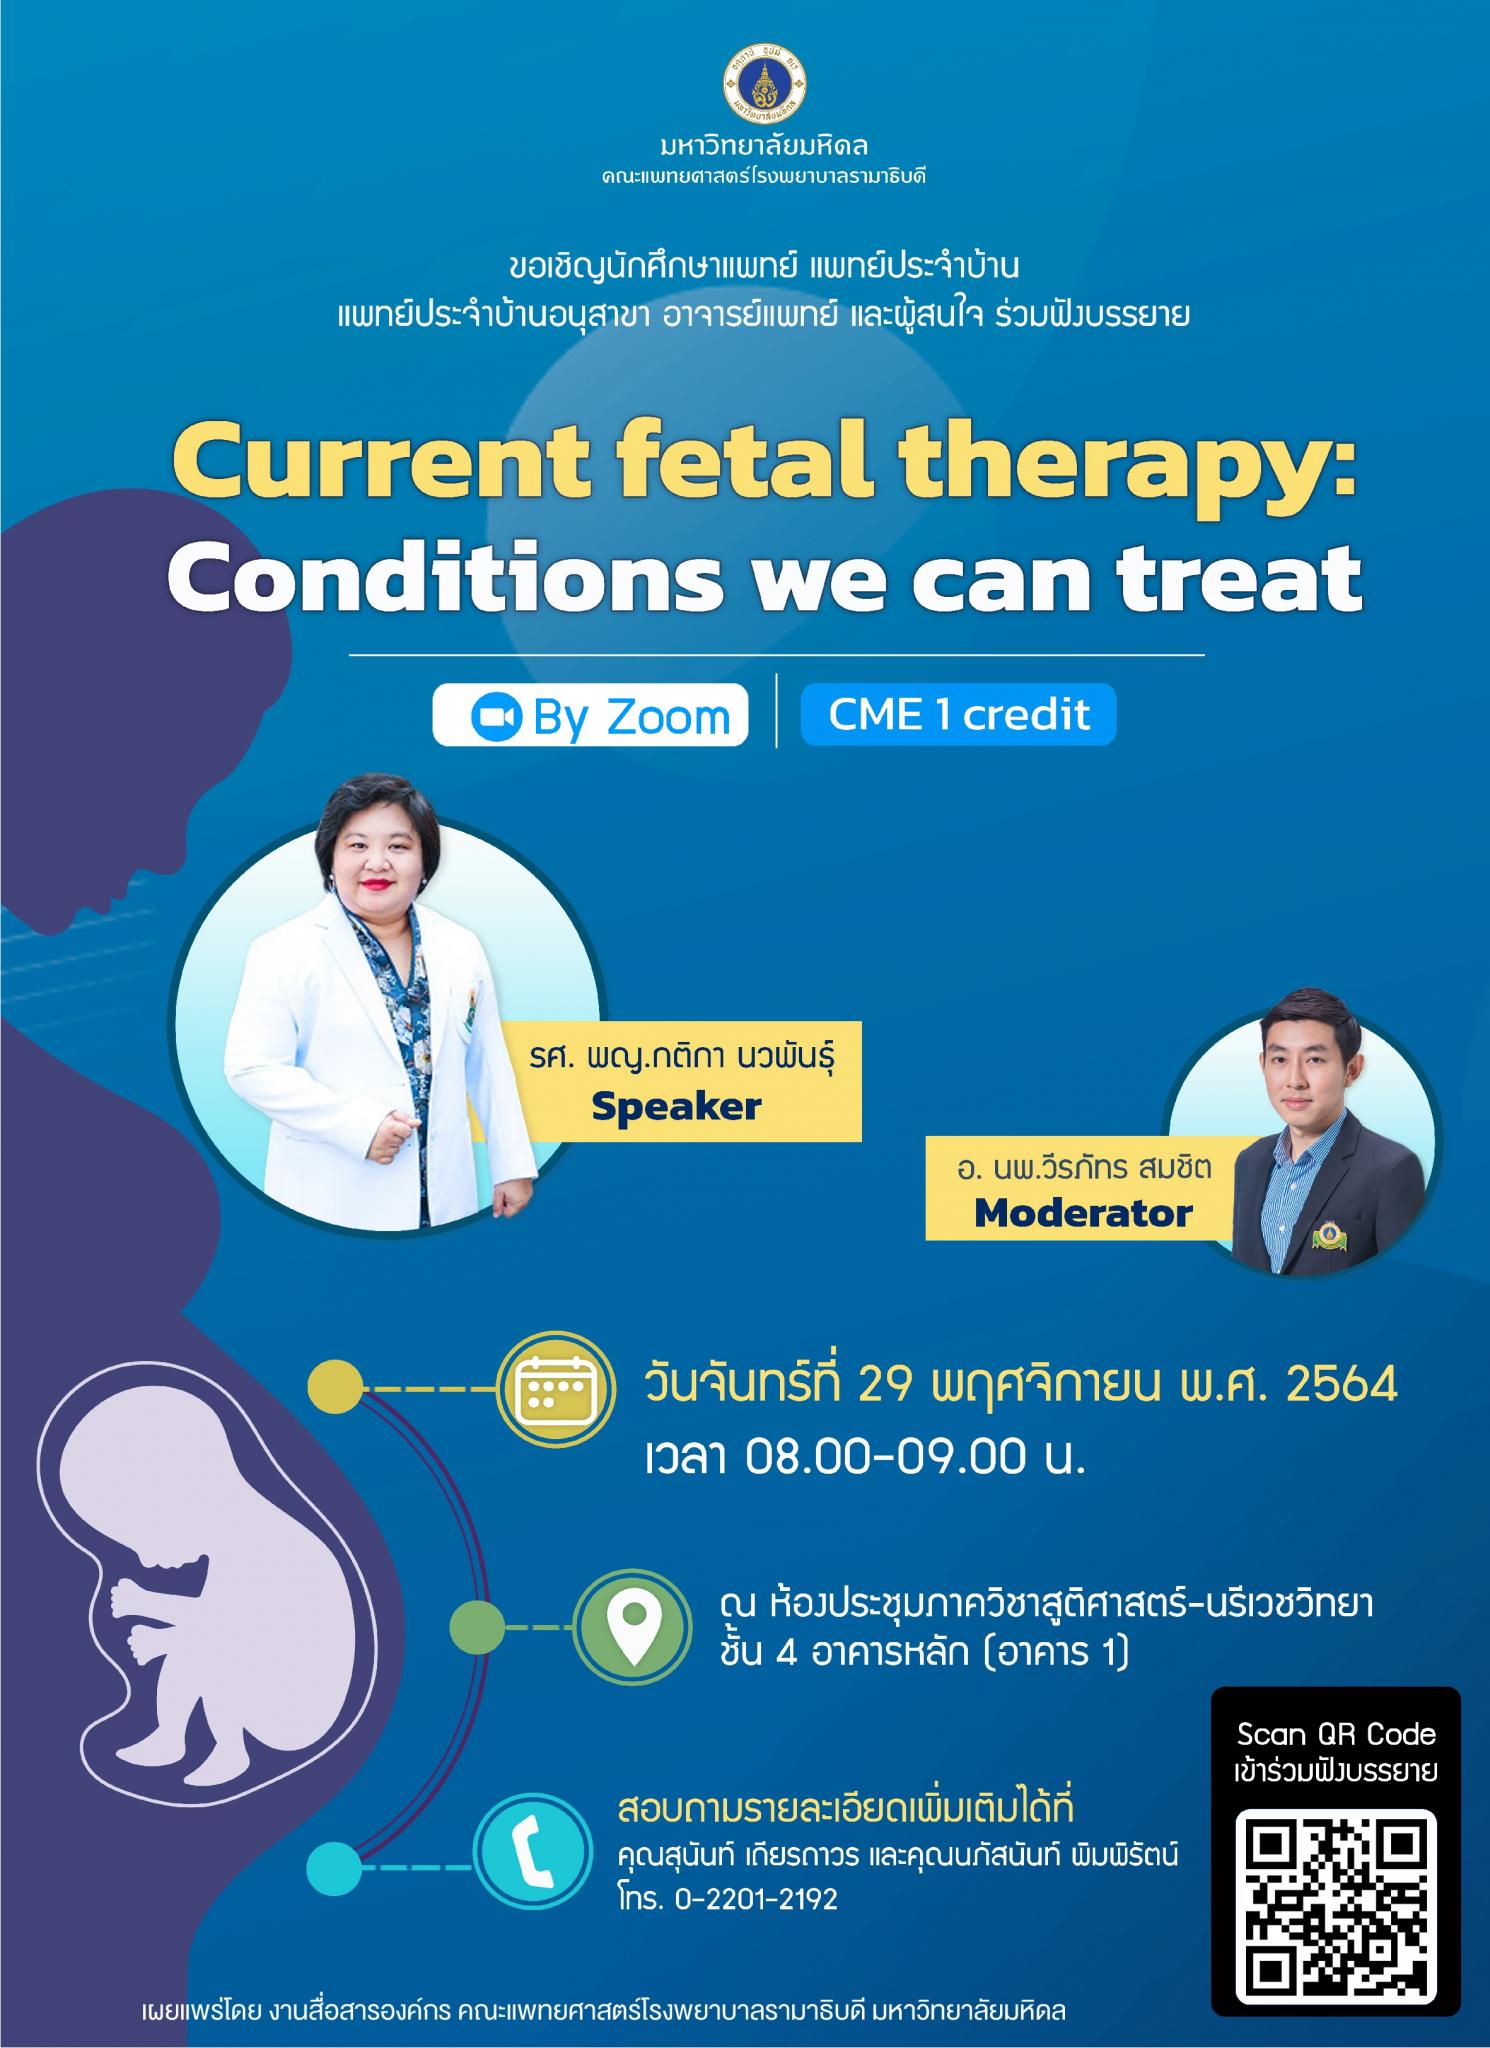 Current fetal therapy: Conditions we can treat